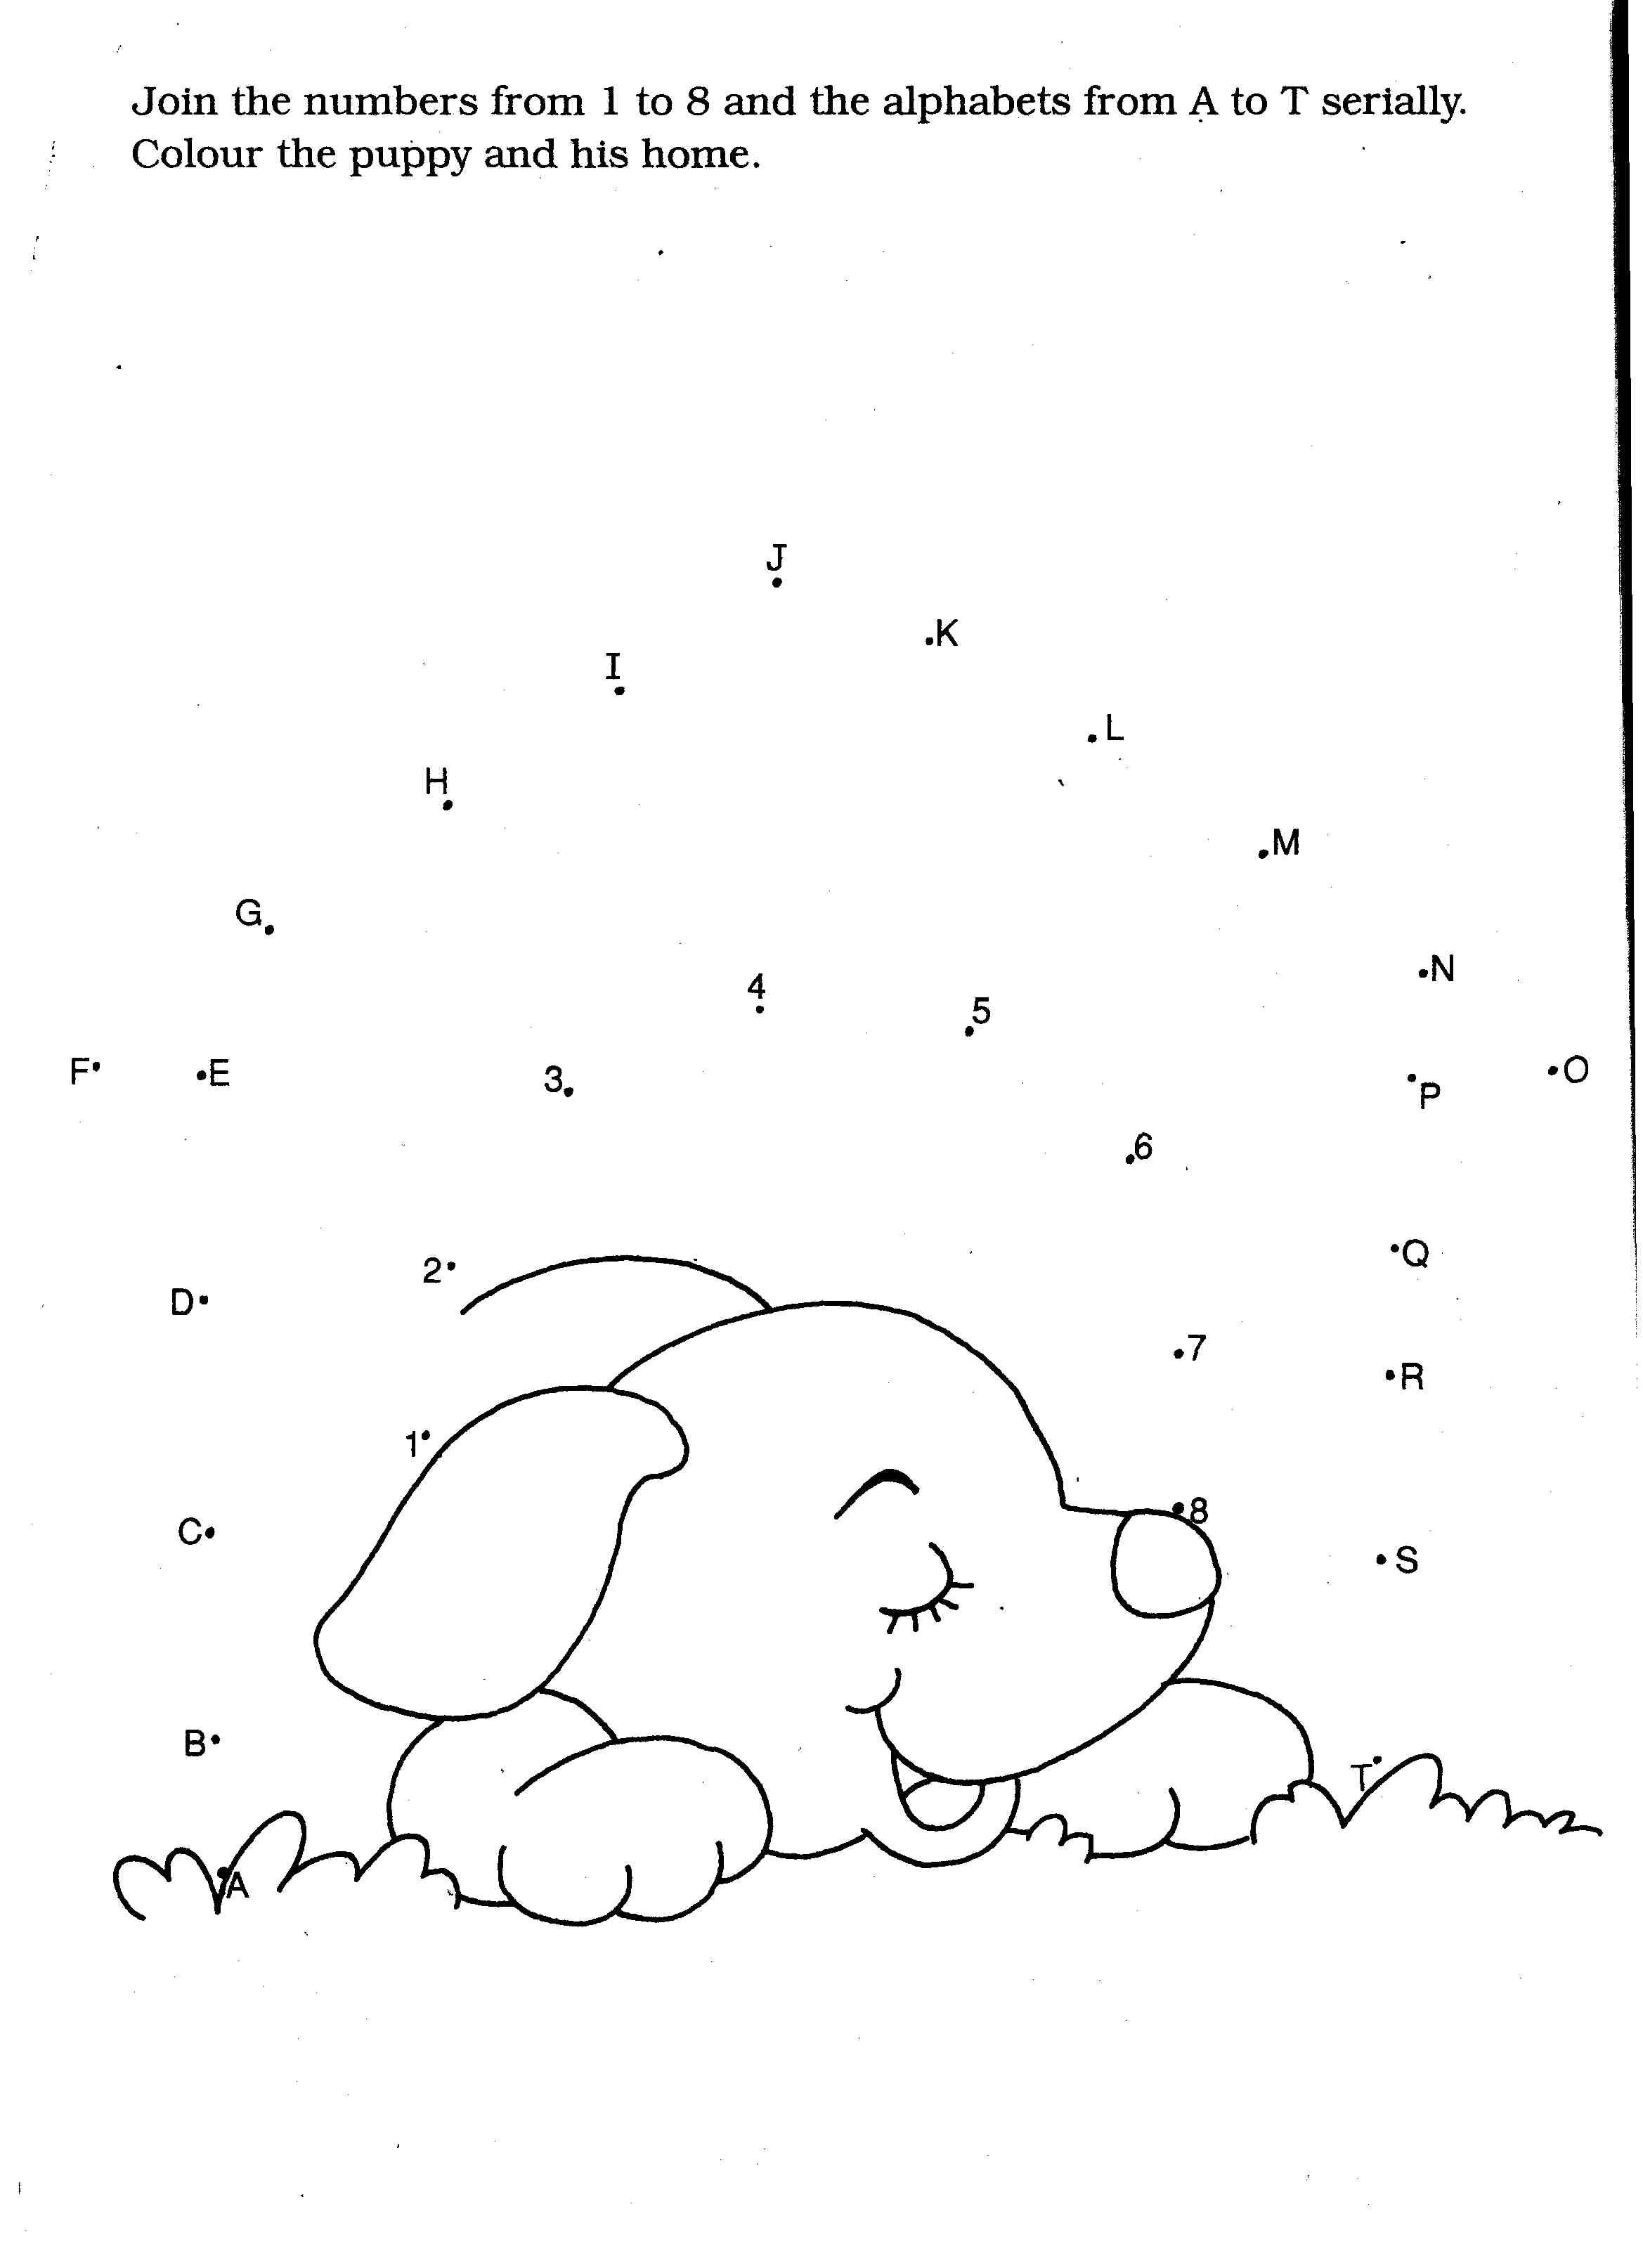 Puppy Coloring Pages Related Keywords & Suggestions - Puppy ...